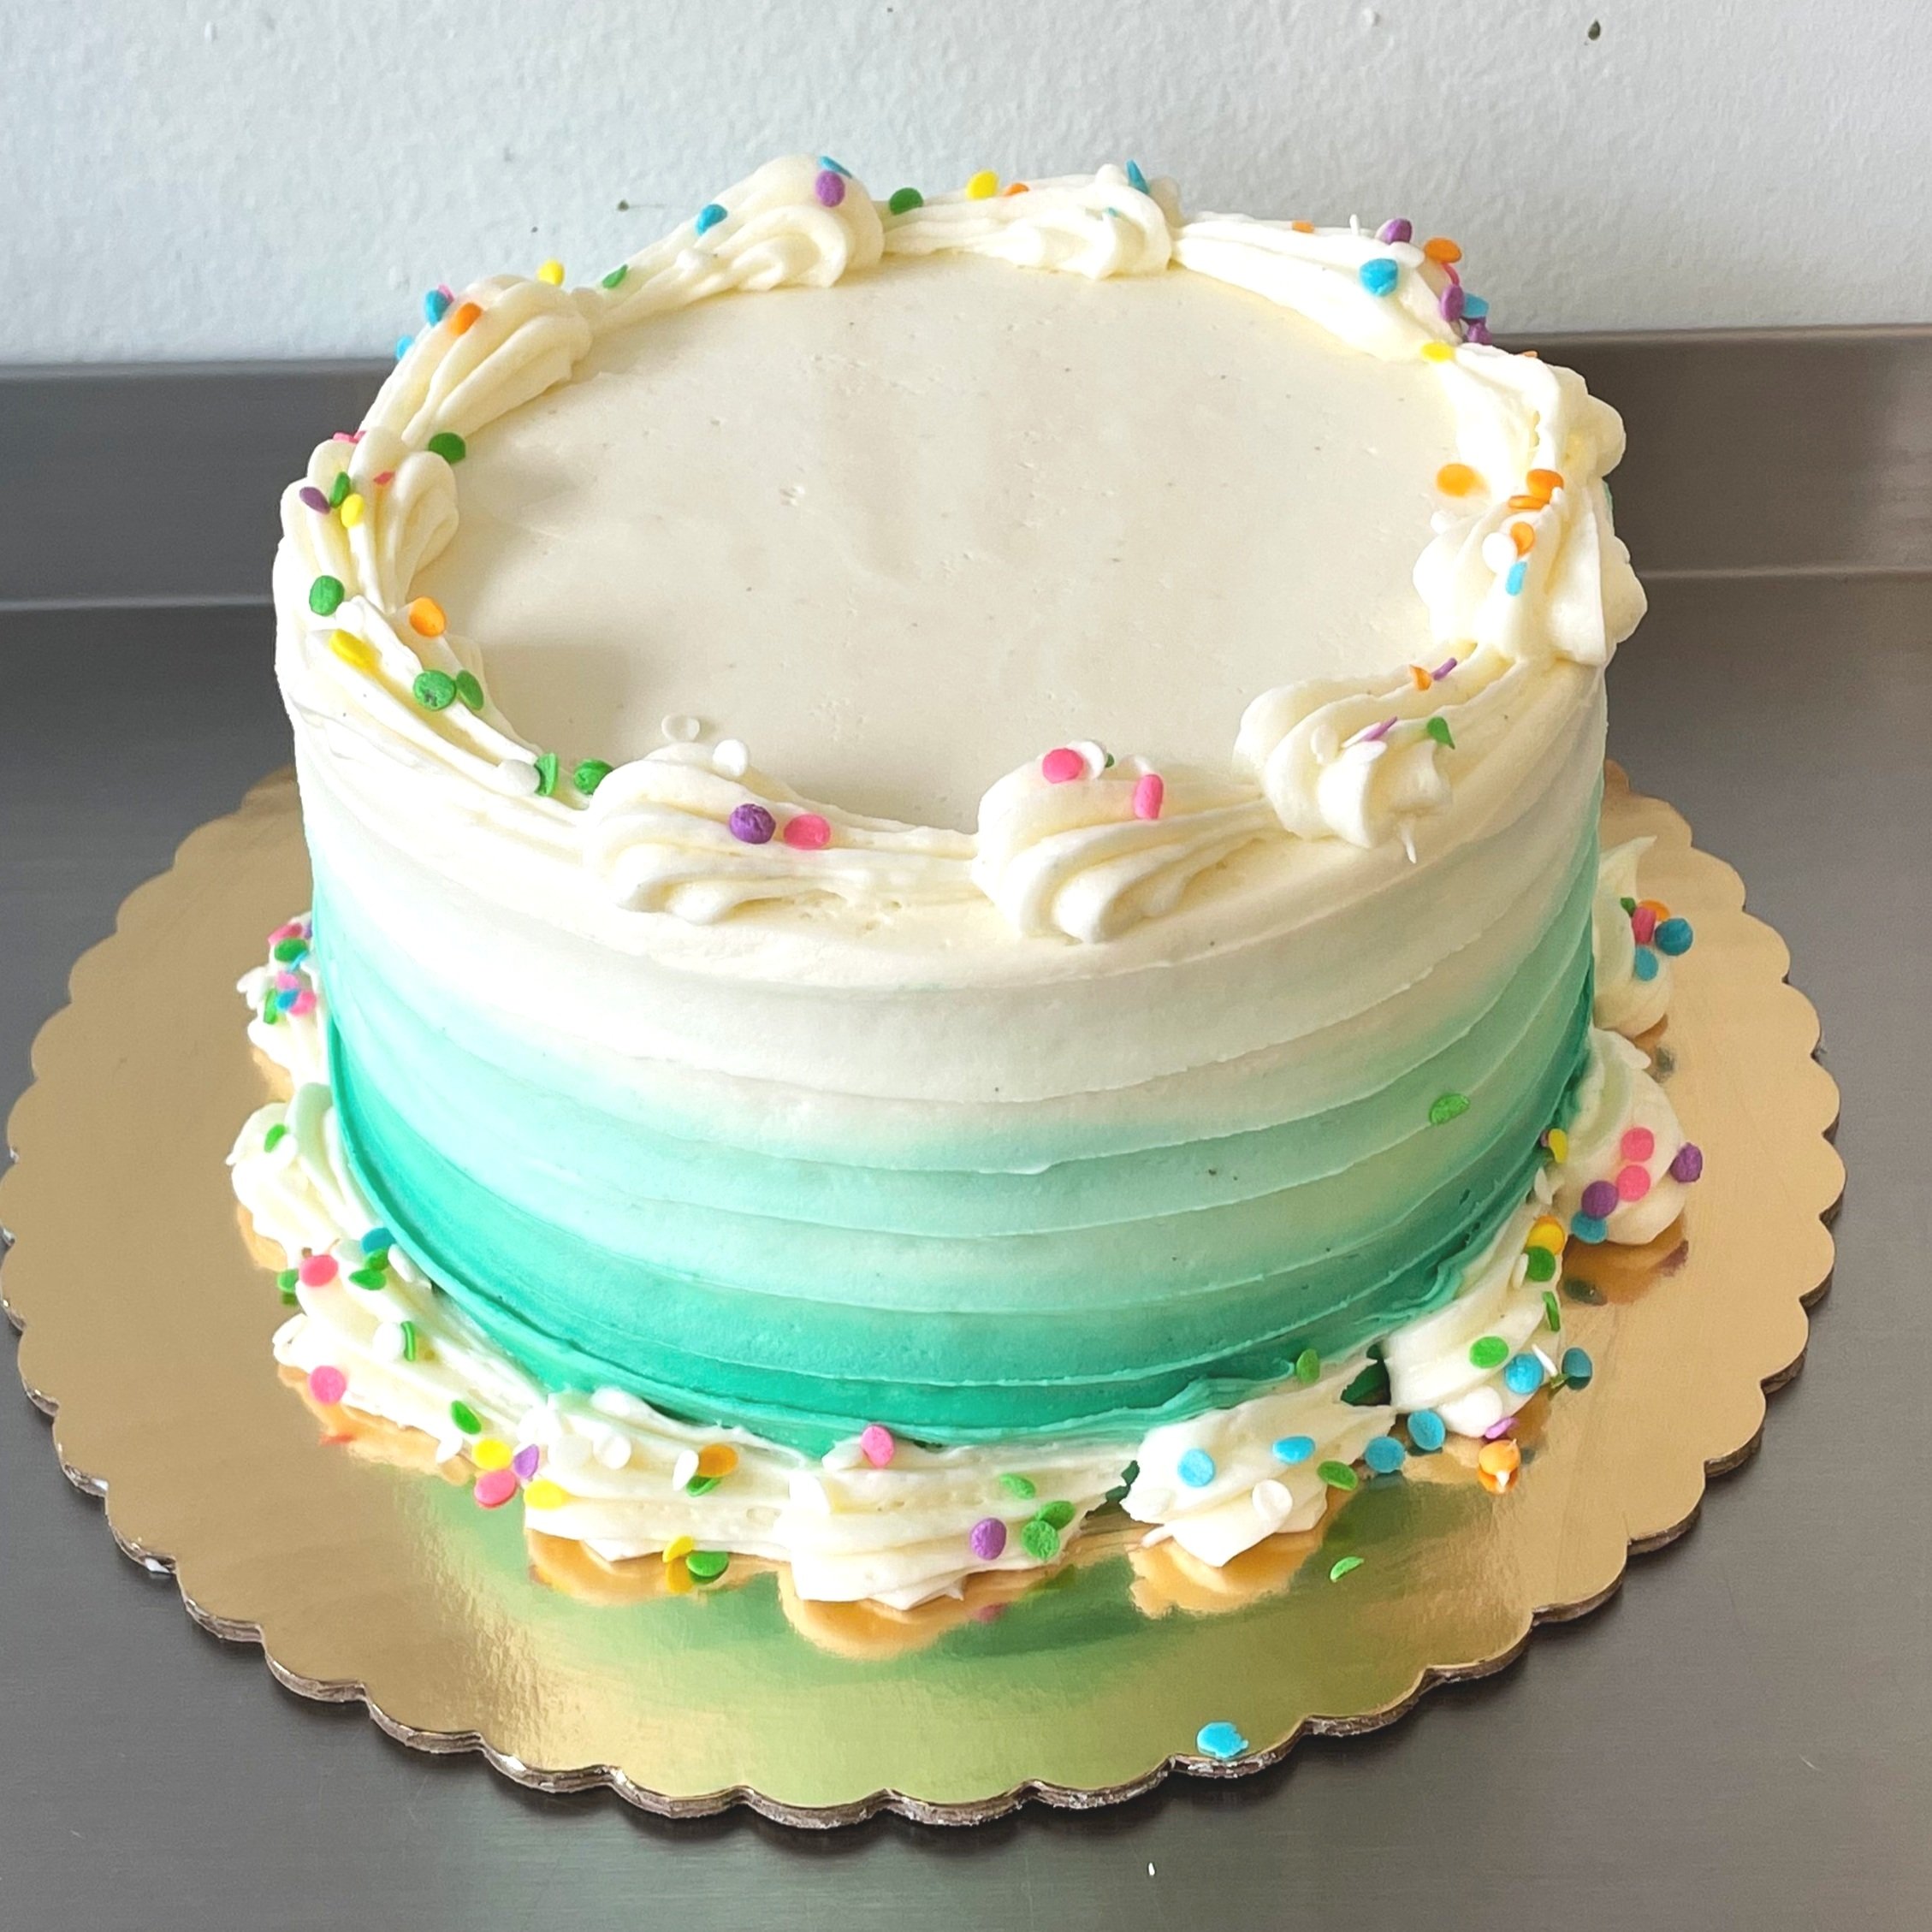 Gluten-free Corn-free Birthday Cake (1280×939) – Out of the Bubble Bakery